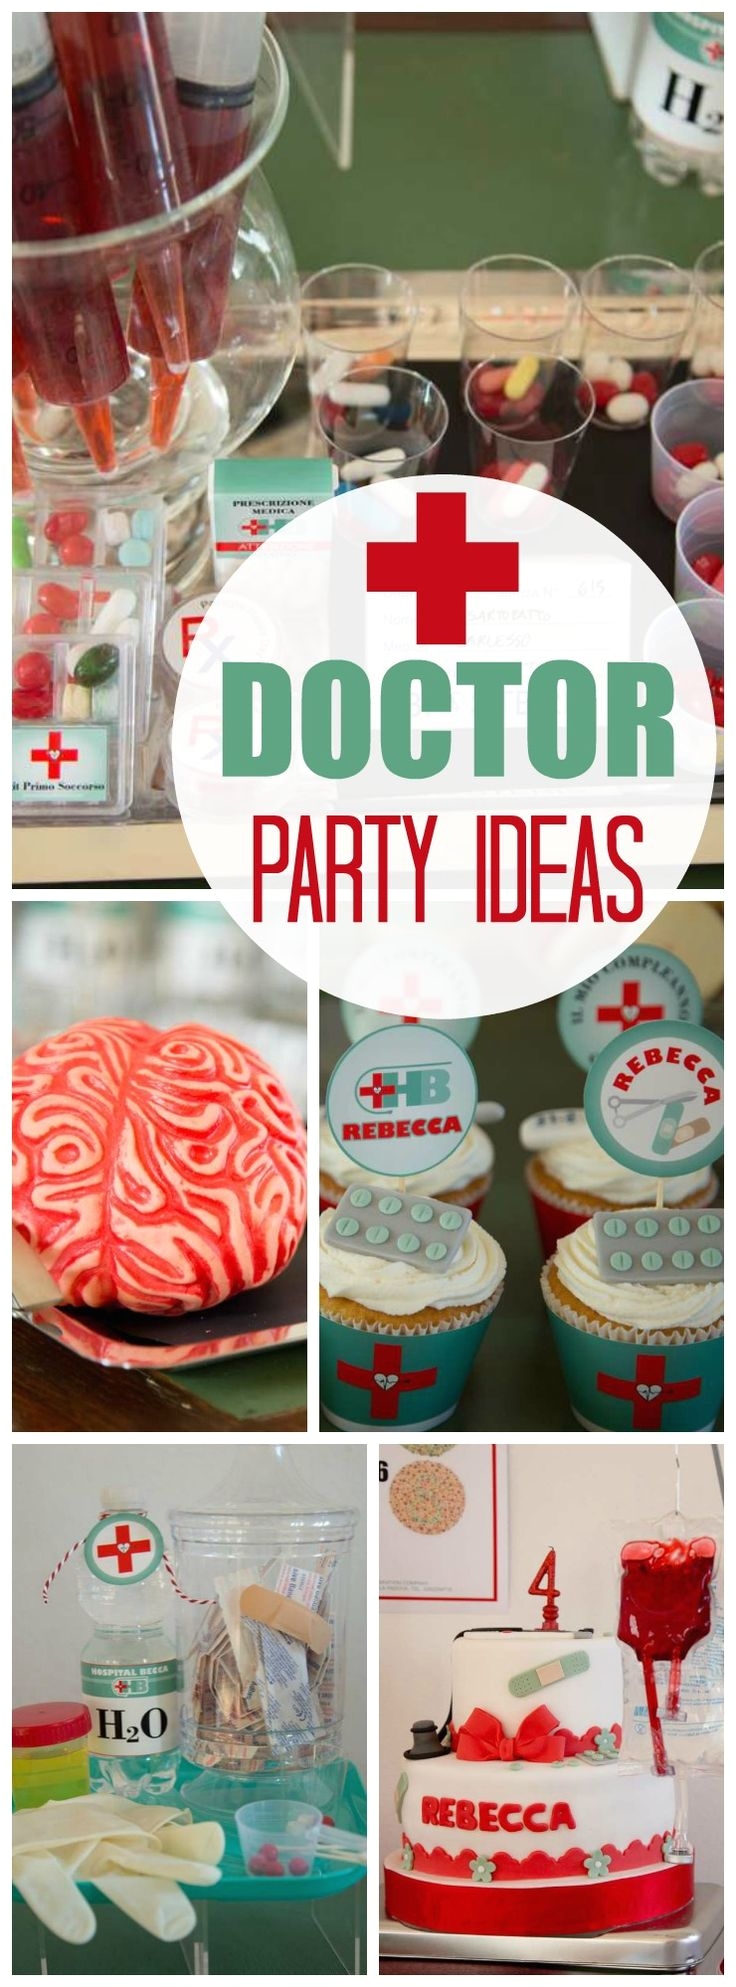 doctor party birthday doctor party